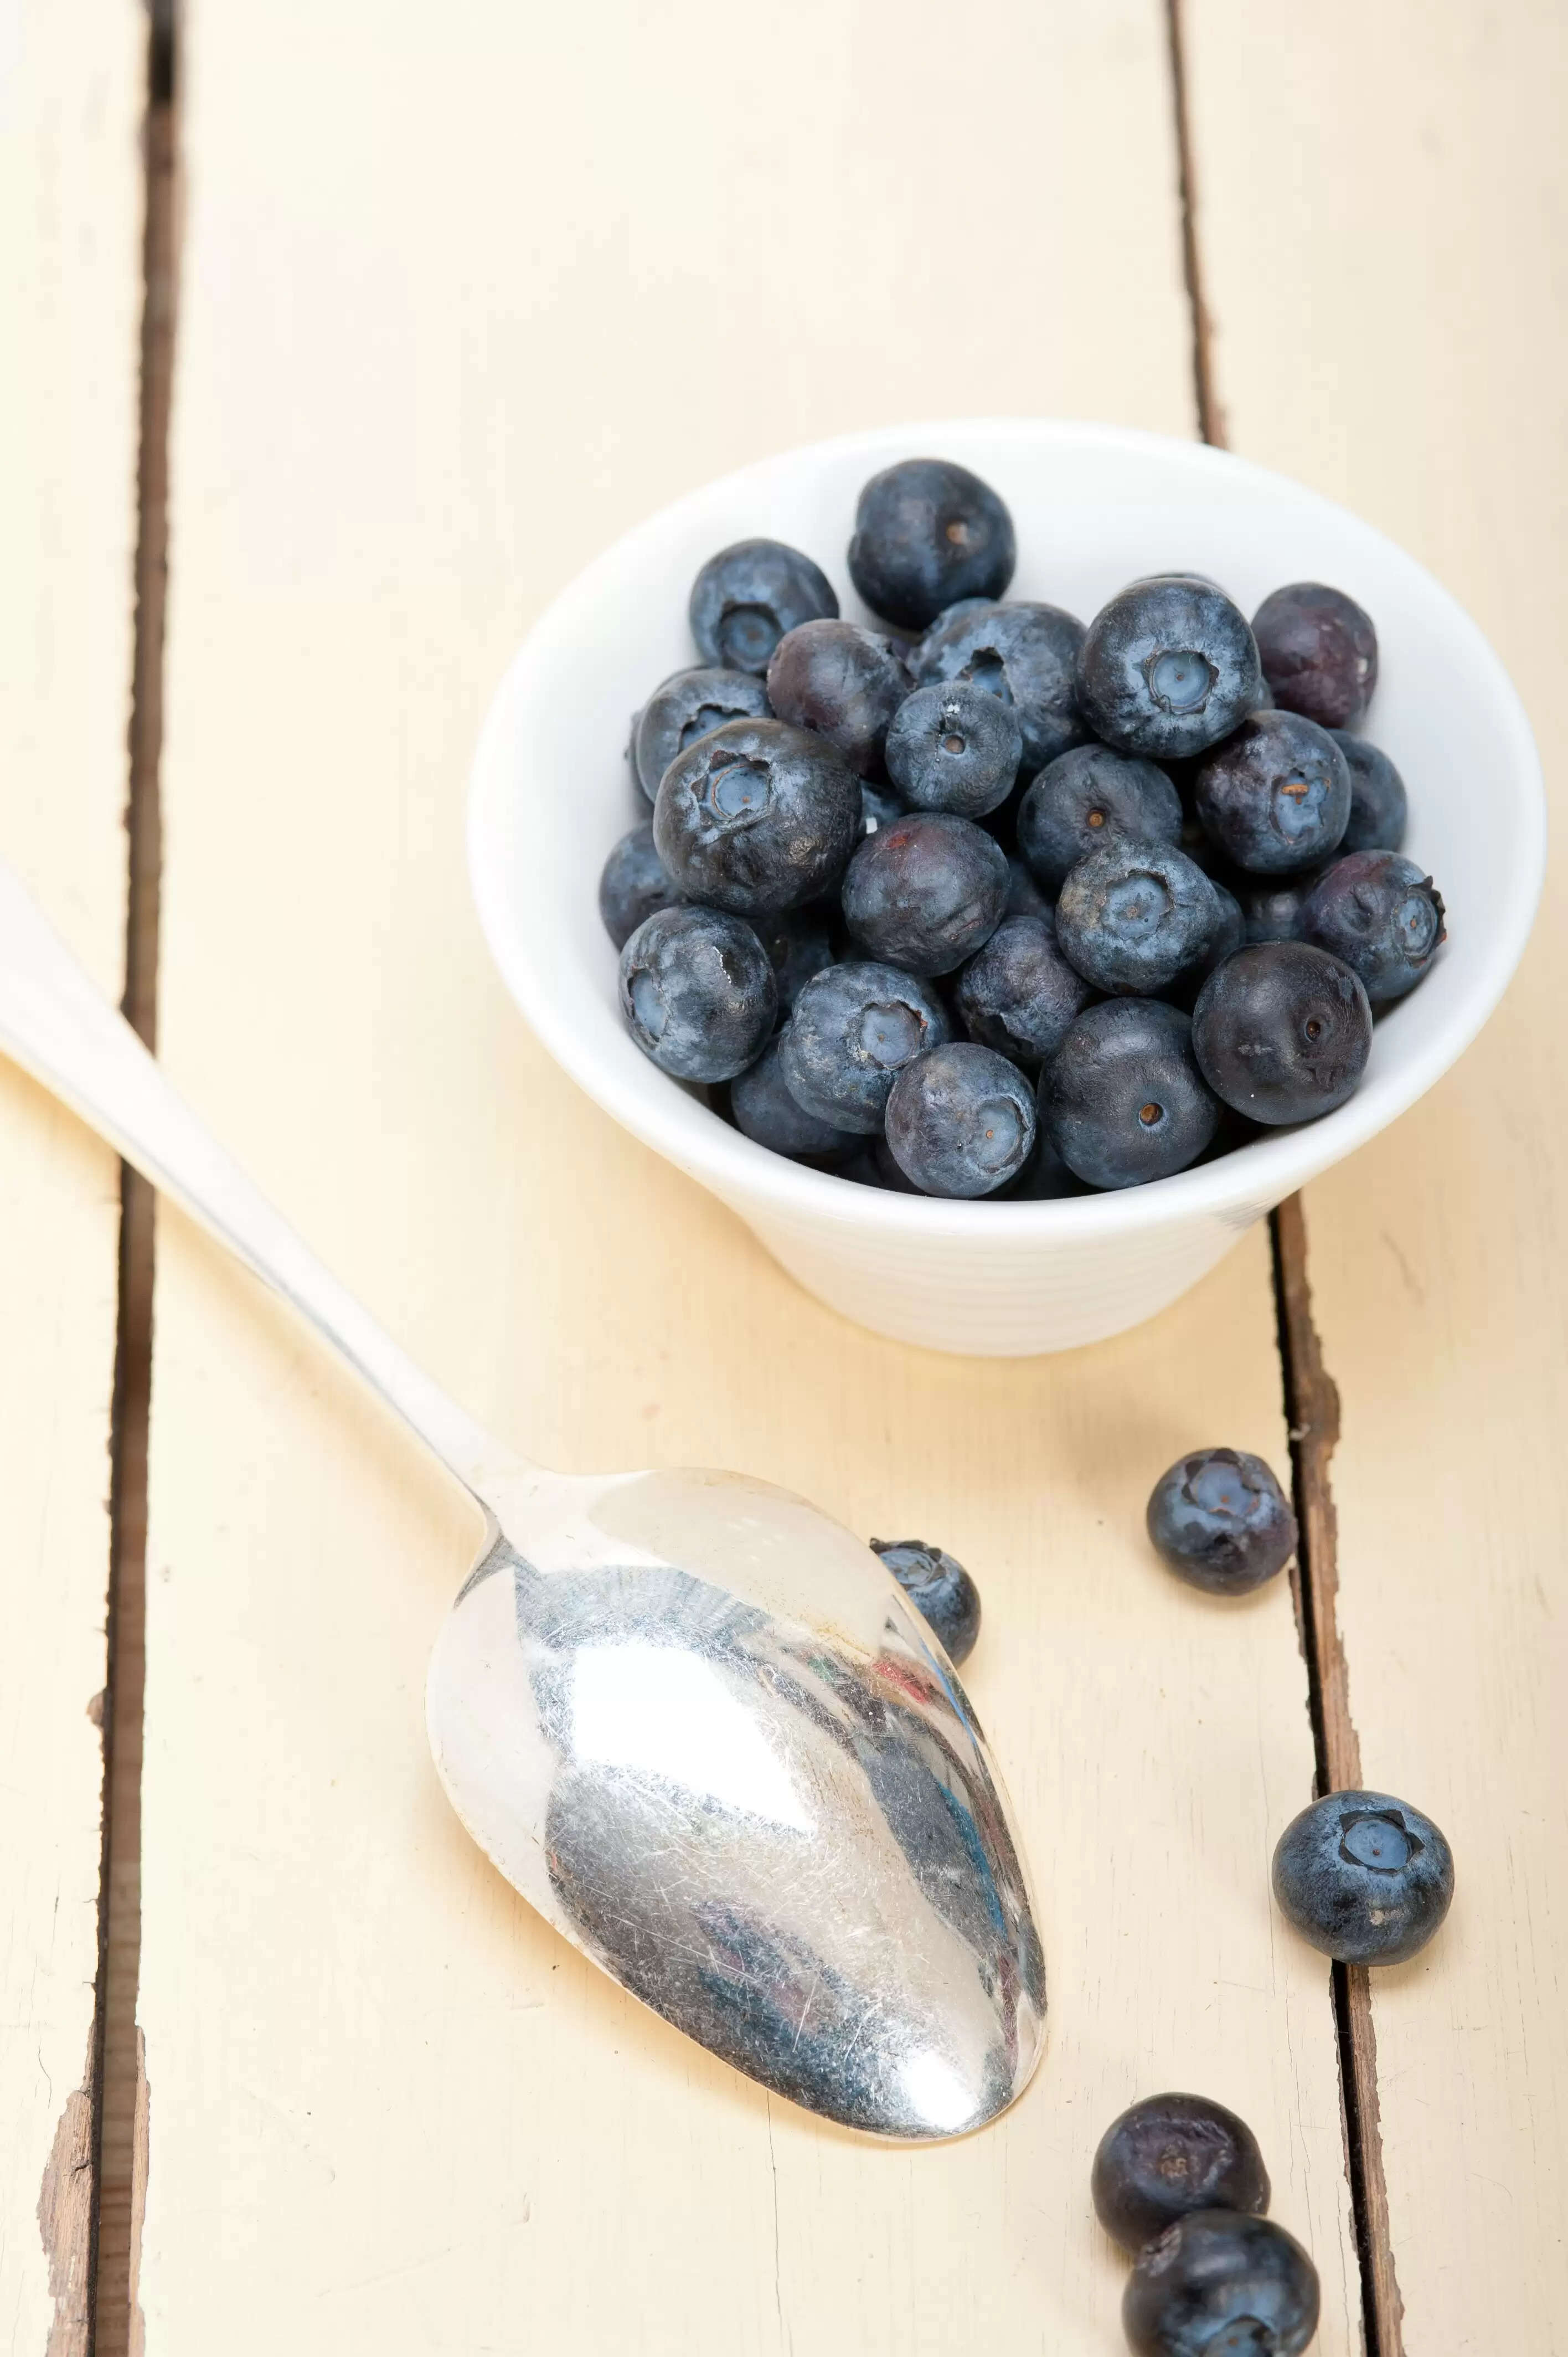 From Blueberries To turmeric, Here Are Some Anti-Inflammatory Foods You Should Try